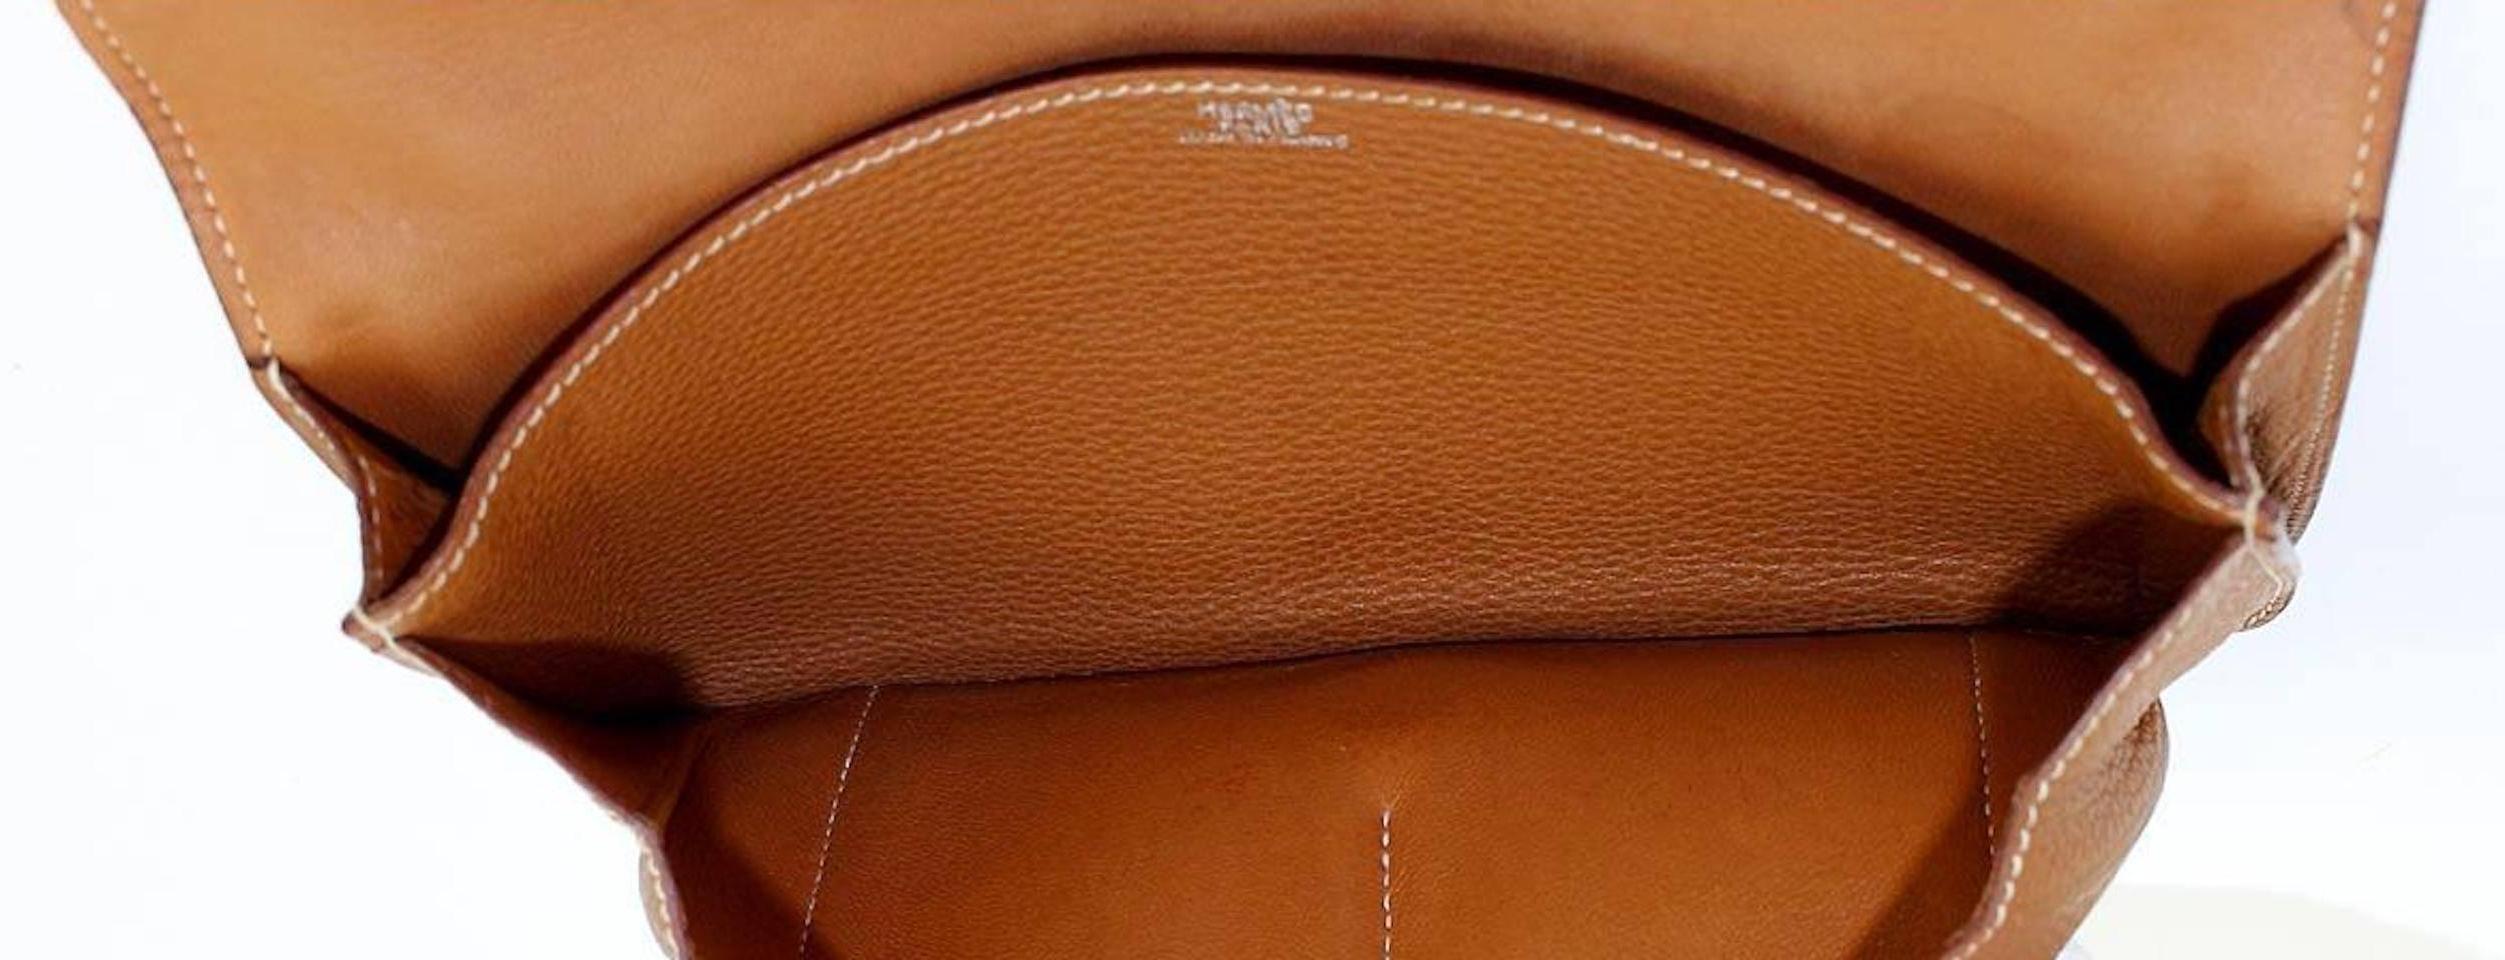 Hermes Cognac Leather Men's Women's Travel Carryall Fanny Pack Waist Belt Bag In Excellent Condition In Chicago, IL